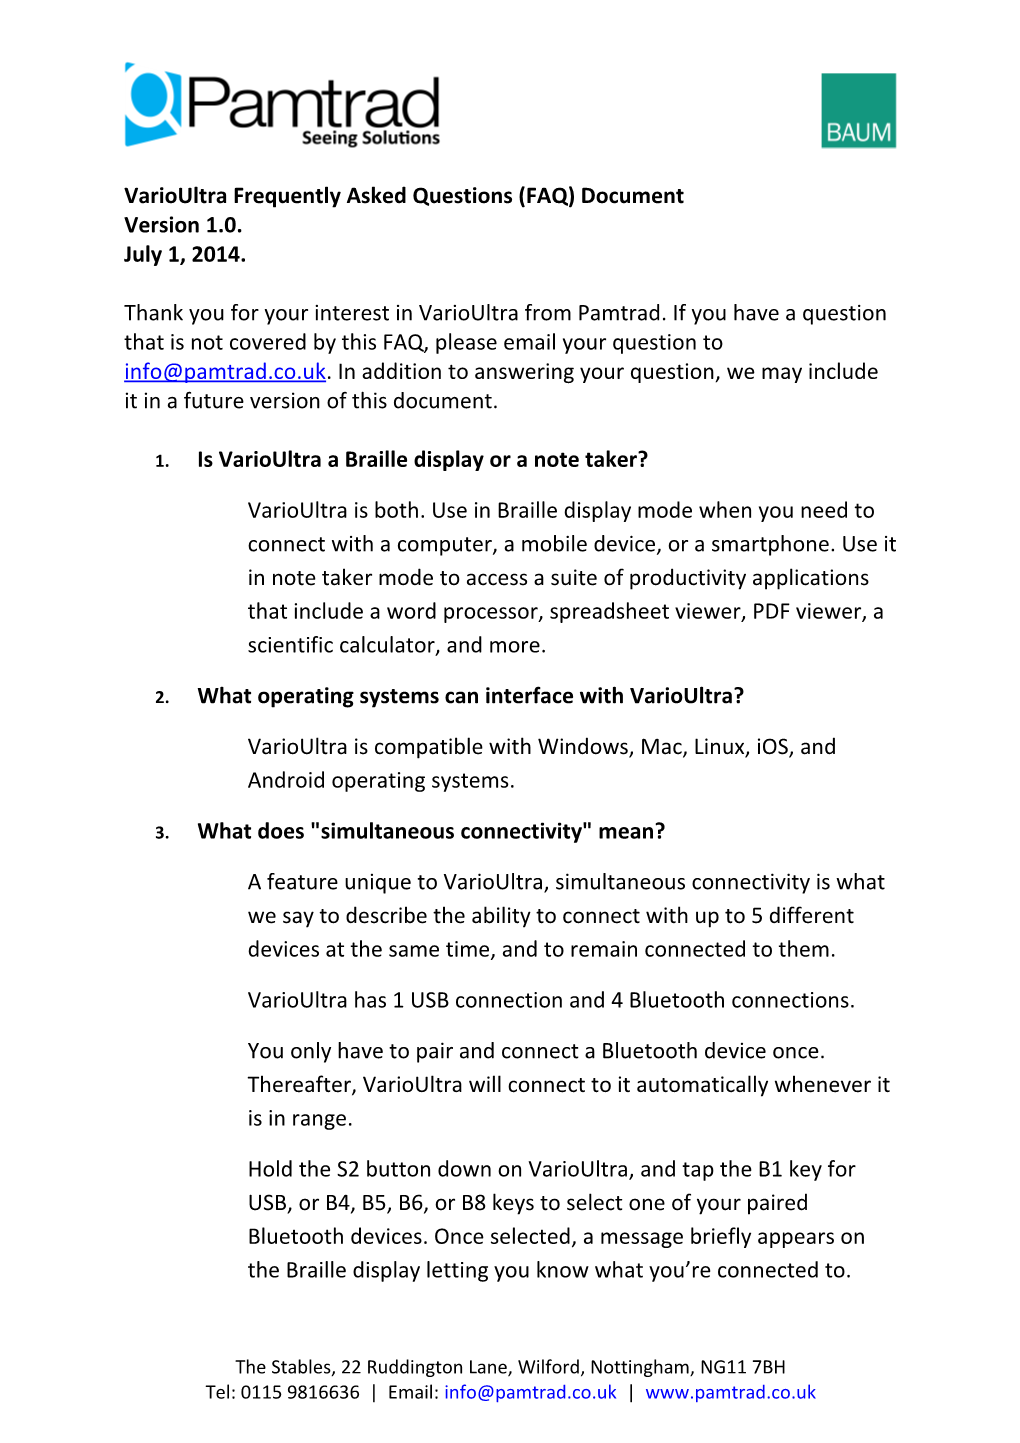 Varioultra Frequently Asked Questions (FAQ) Document Version 1.0. July 1, 2014